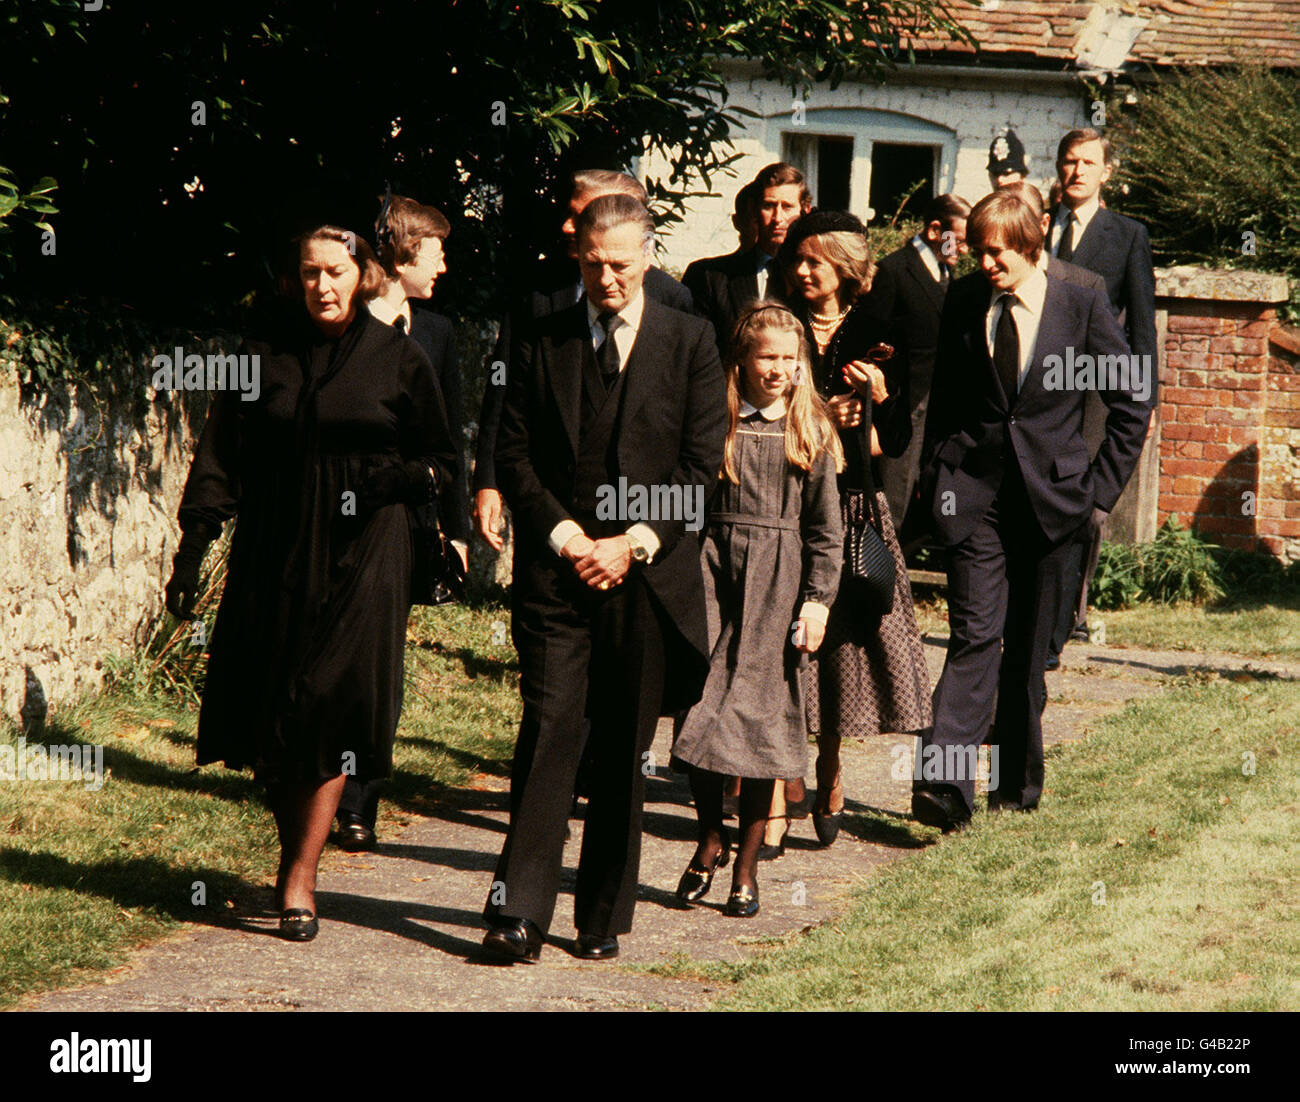 PA NEWS PHOTO 6/9/79 MOURNERS AT THE CHURCH OF ST. JOHN THE BAPTIST AT MERSHAM, NEAR ASHFORD, KENT FOR THE FUNERAL OF THE DOWAGER LADY BRABOURNE (82) AND 14 YEAR OLD NICHOLAS KNATCHBULL BOTH VICTIMS OF THE BOMB OUTRAGE WHICH ALSO CLAIMED THE LIFE OF LORD MOUNTBATTEN. IN FOREGROUND ARE LADY PAMELA HICKS, DAUGHTER OF LORD MOUNTBATTEN AND HER HUSBAND DAVID HICKS Stock Photo